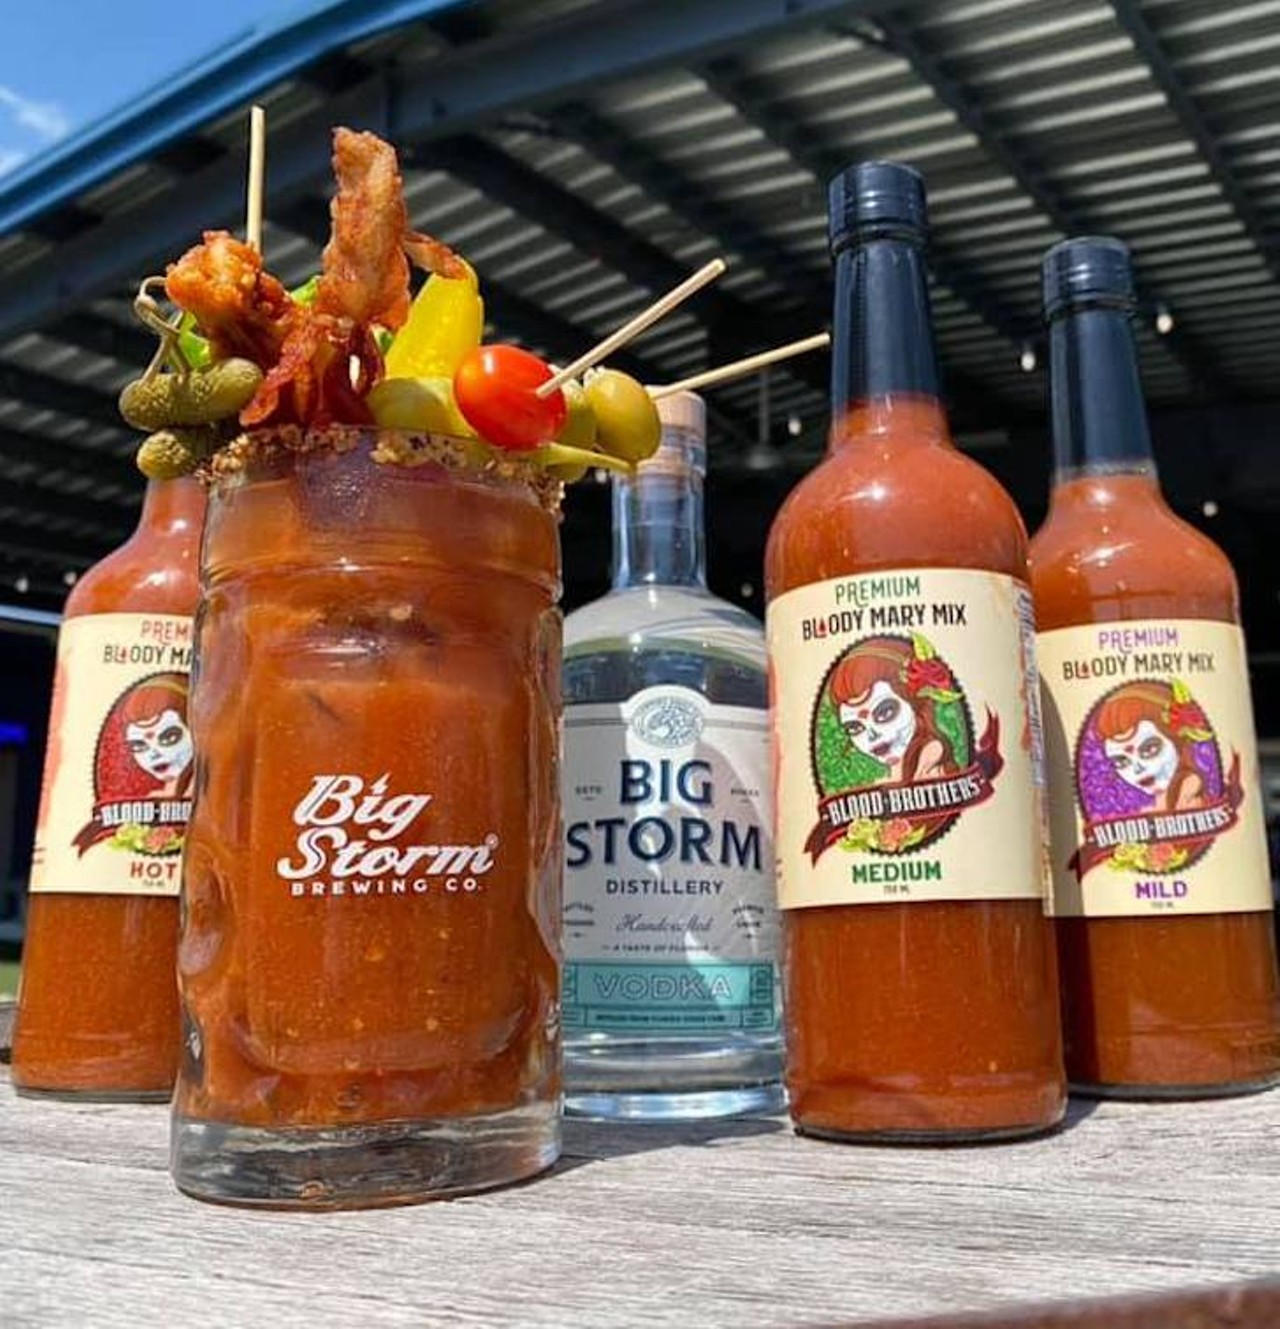 Big Storm Brewing Co.
Bloody Mary Battle Competitor
bigstormbrewery.com